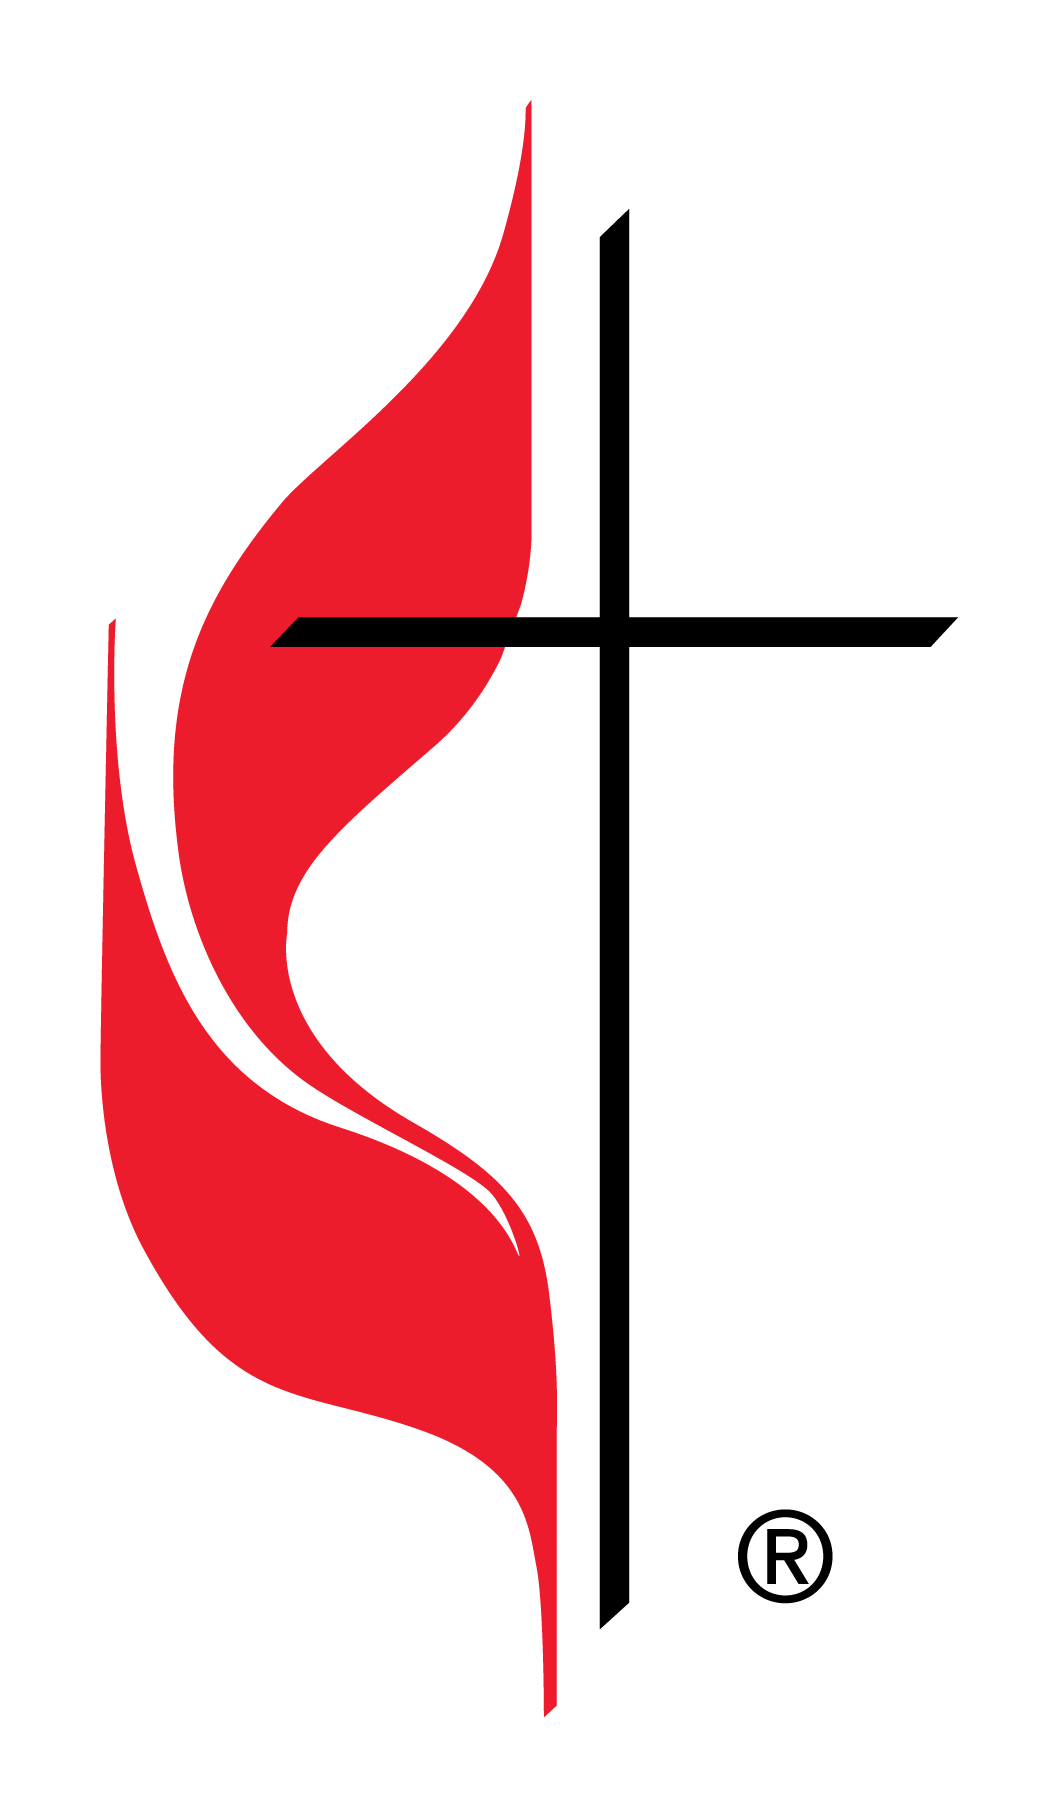 The Cross and Flame is a registered trademark of The United Methodist Church